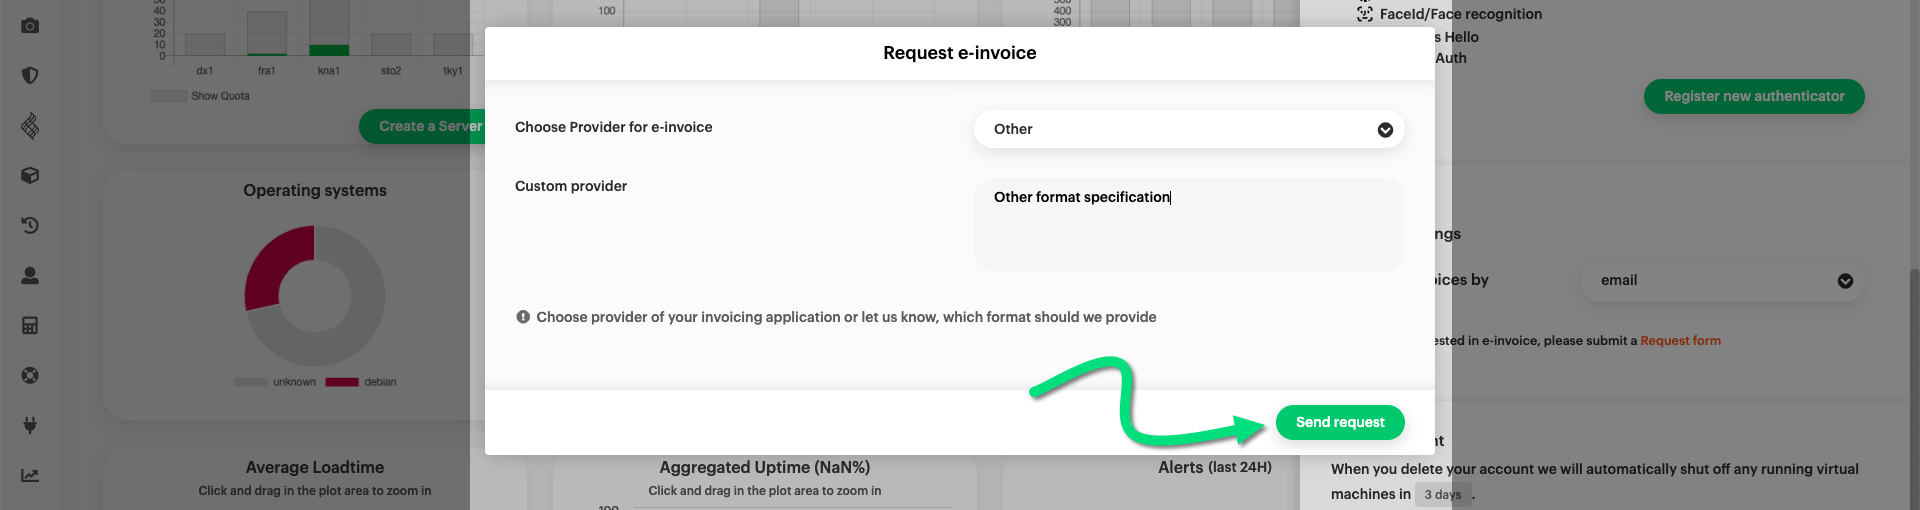 Submit request for new invoicing provider